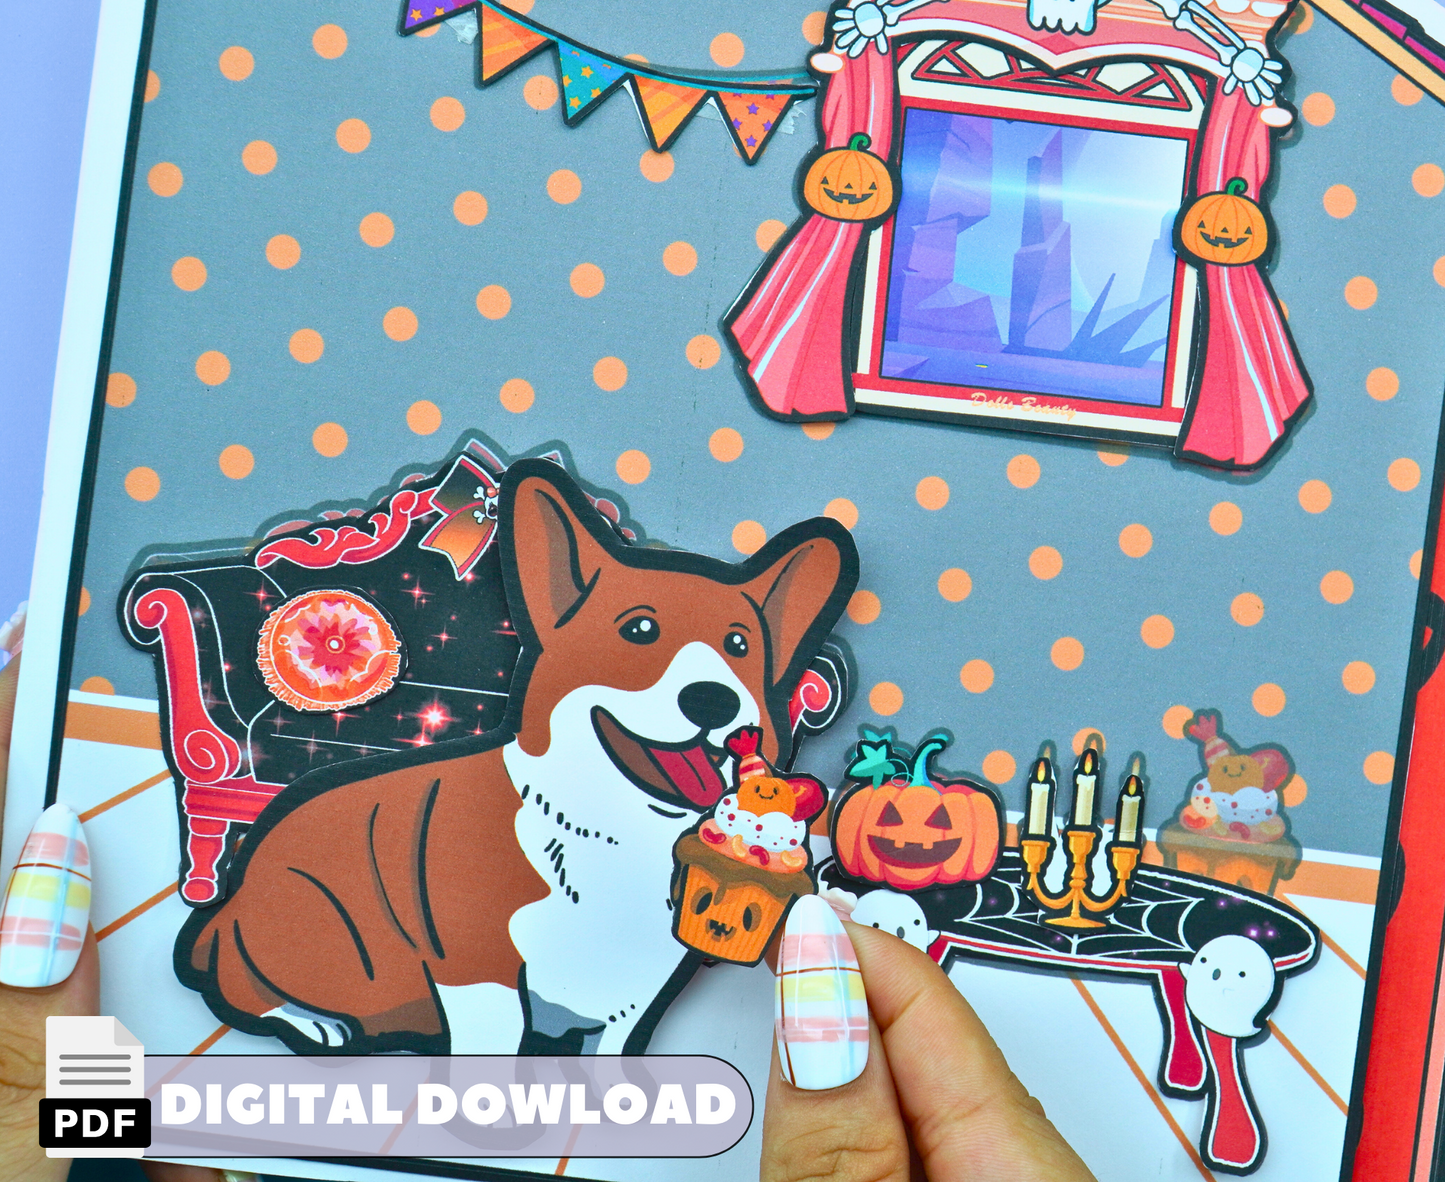 Halloween paper dollhouse printable 🌈 Printable Gothic Dollhouse Busy book for kids | Haunted House DIY Decoration Kit  🌈 Woa Doll Crafts